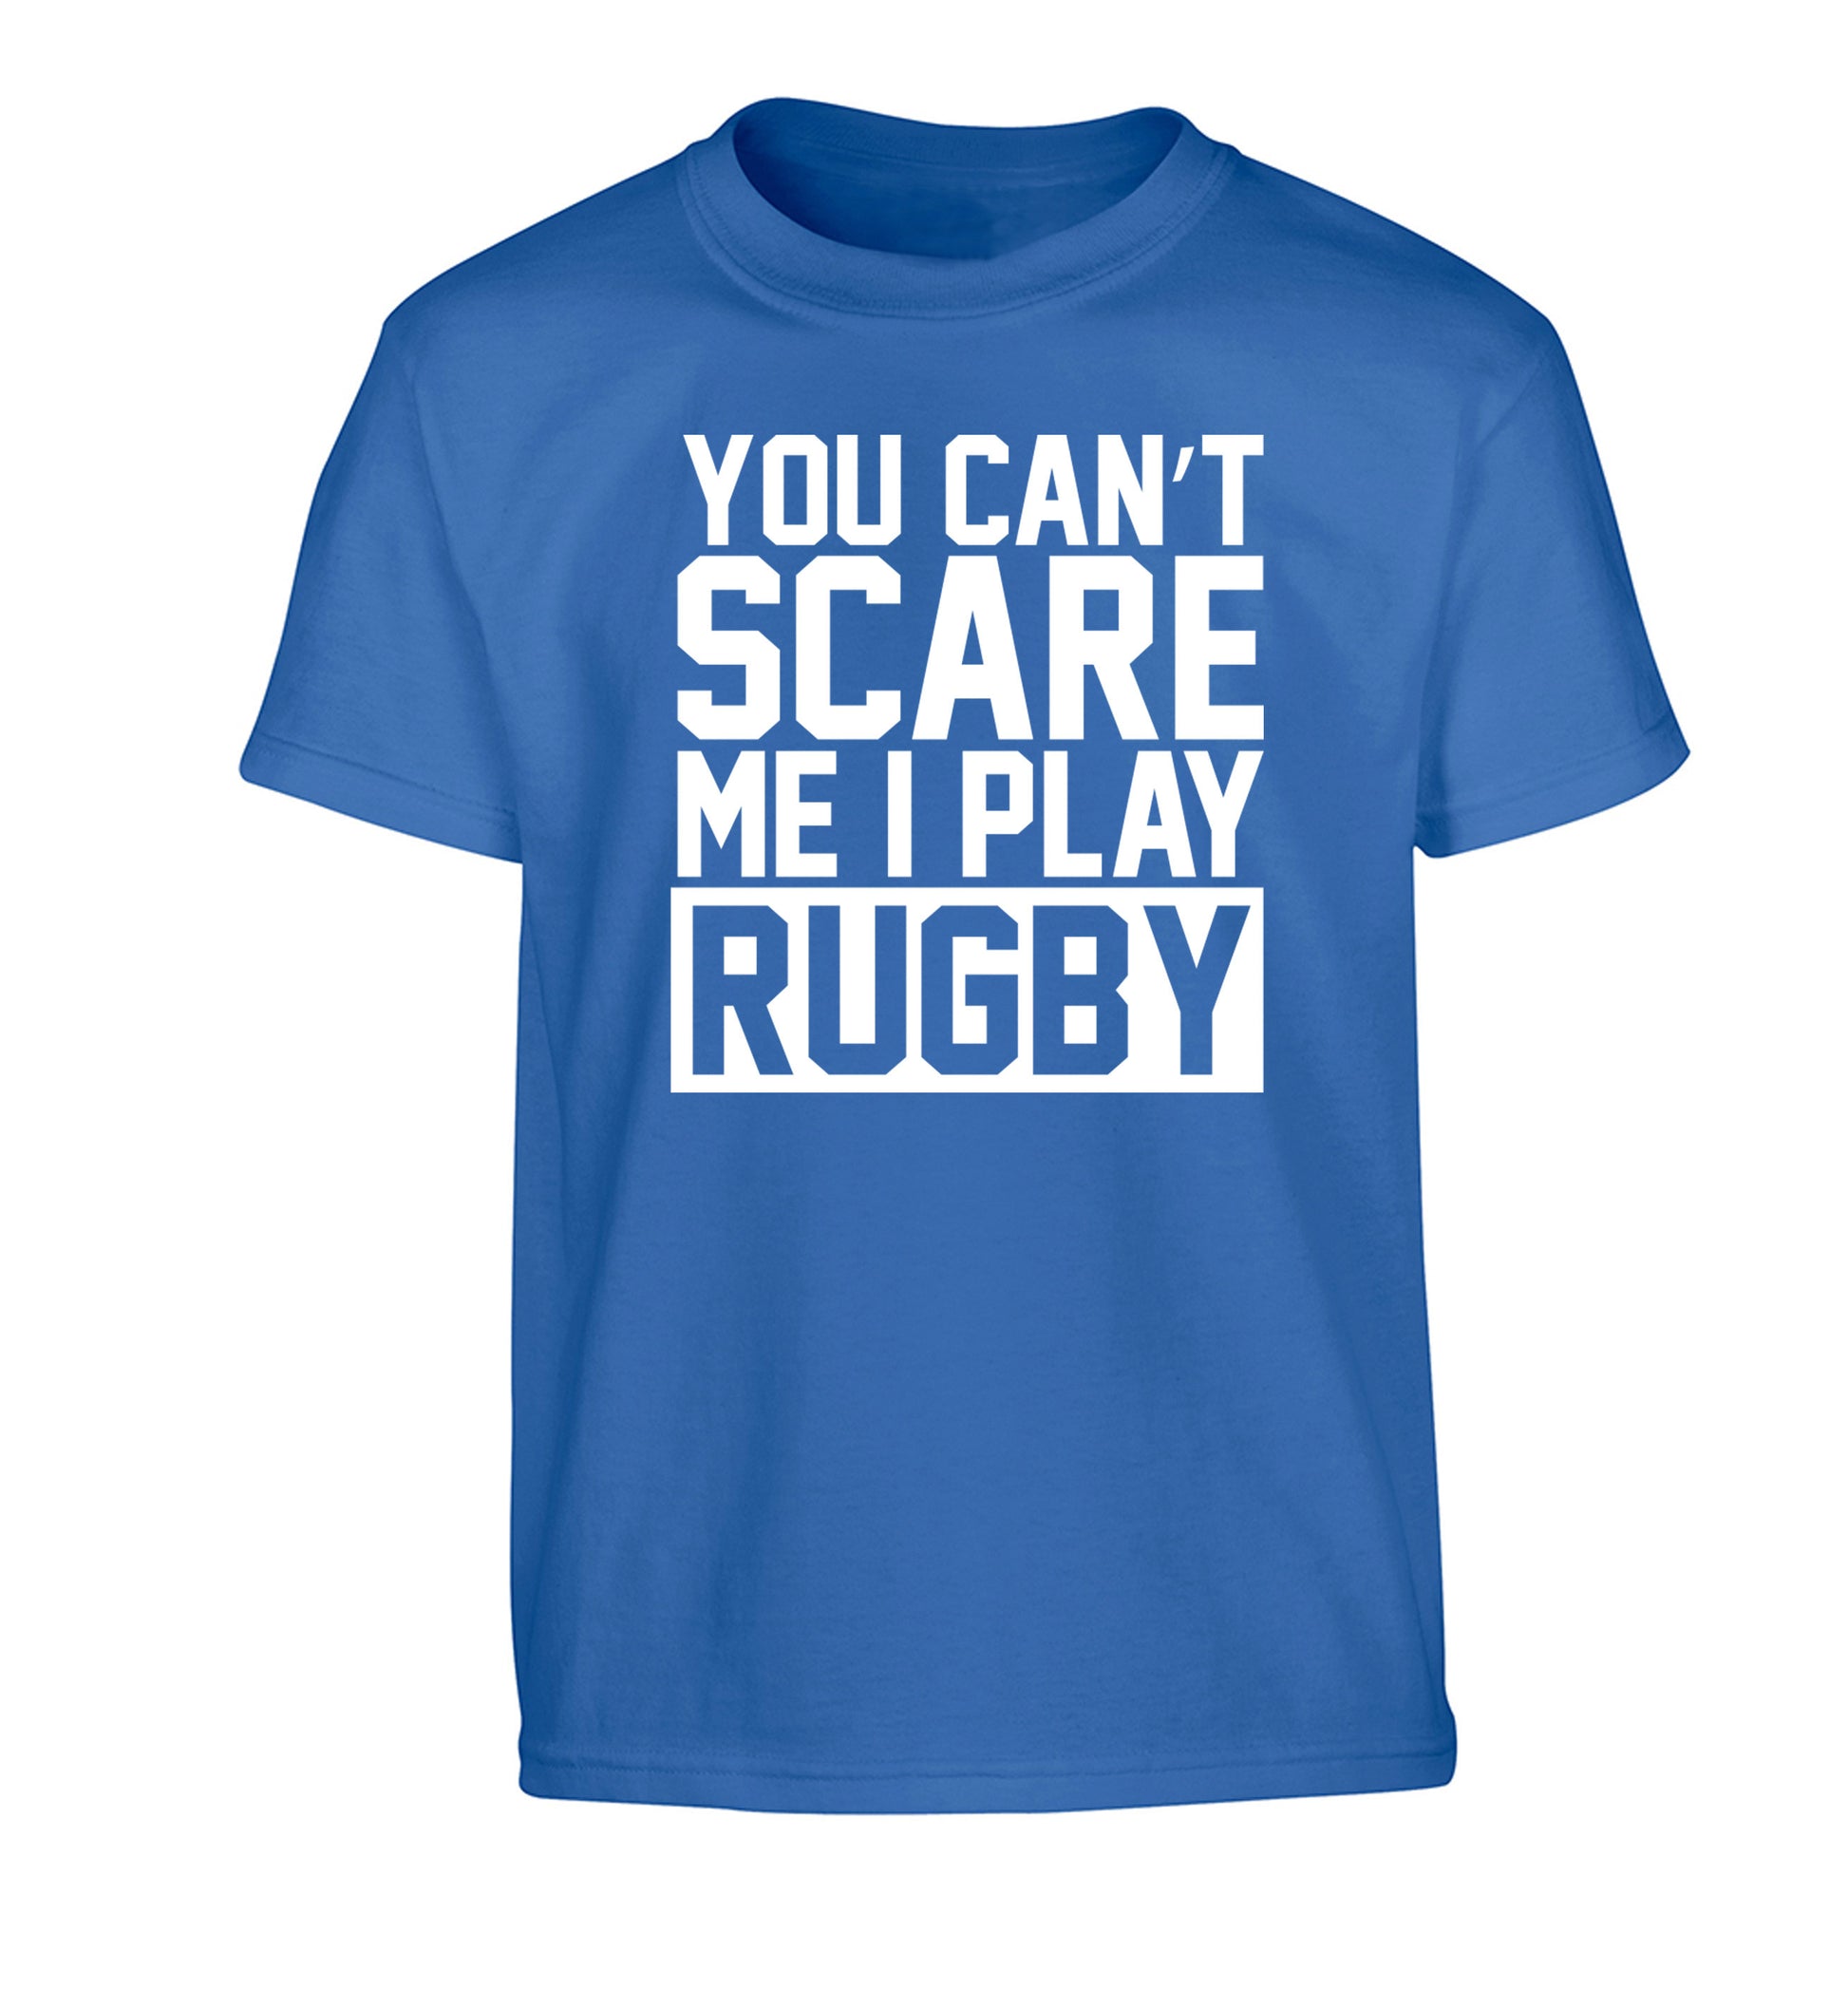 You can't scare me I play rugby Children's blue Tshirt 12-14 Years